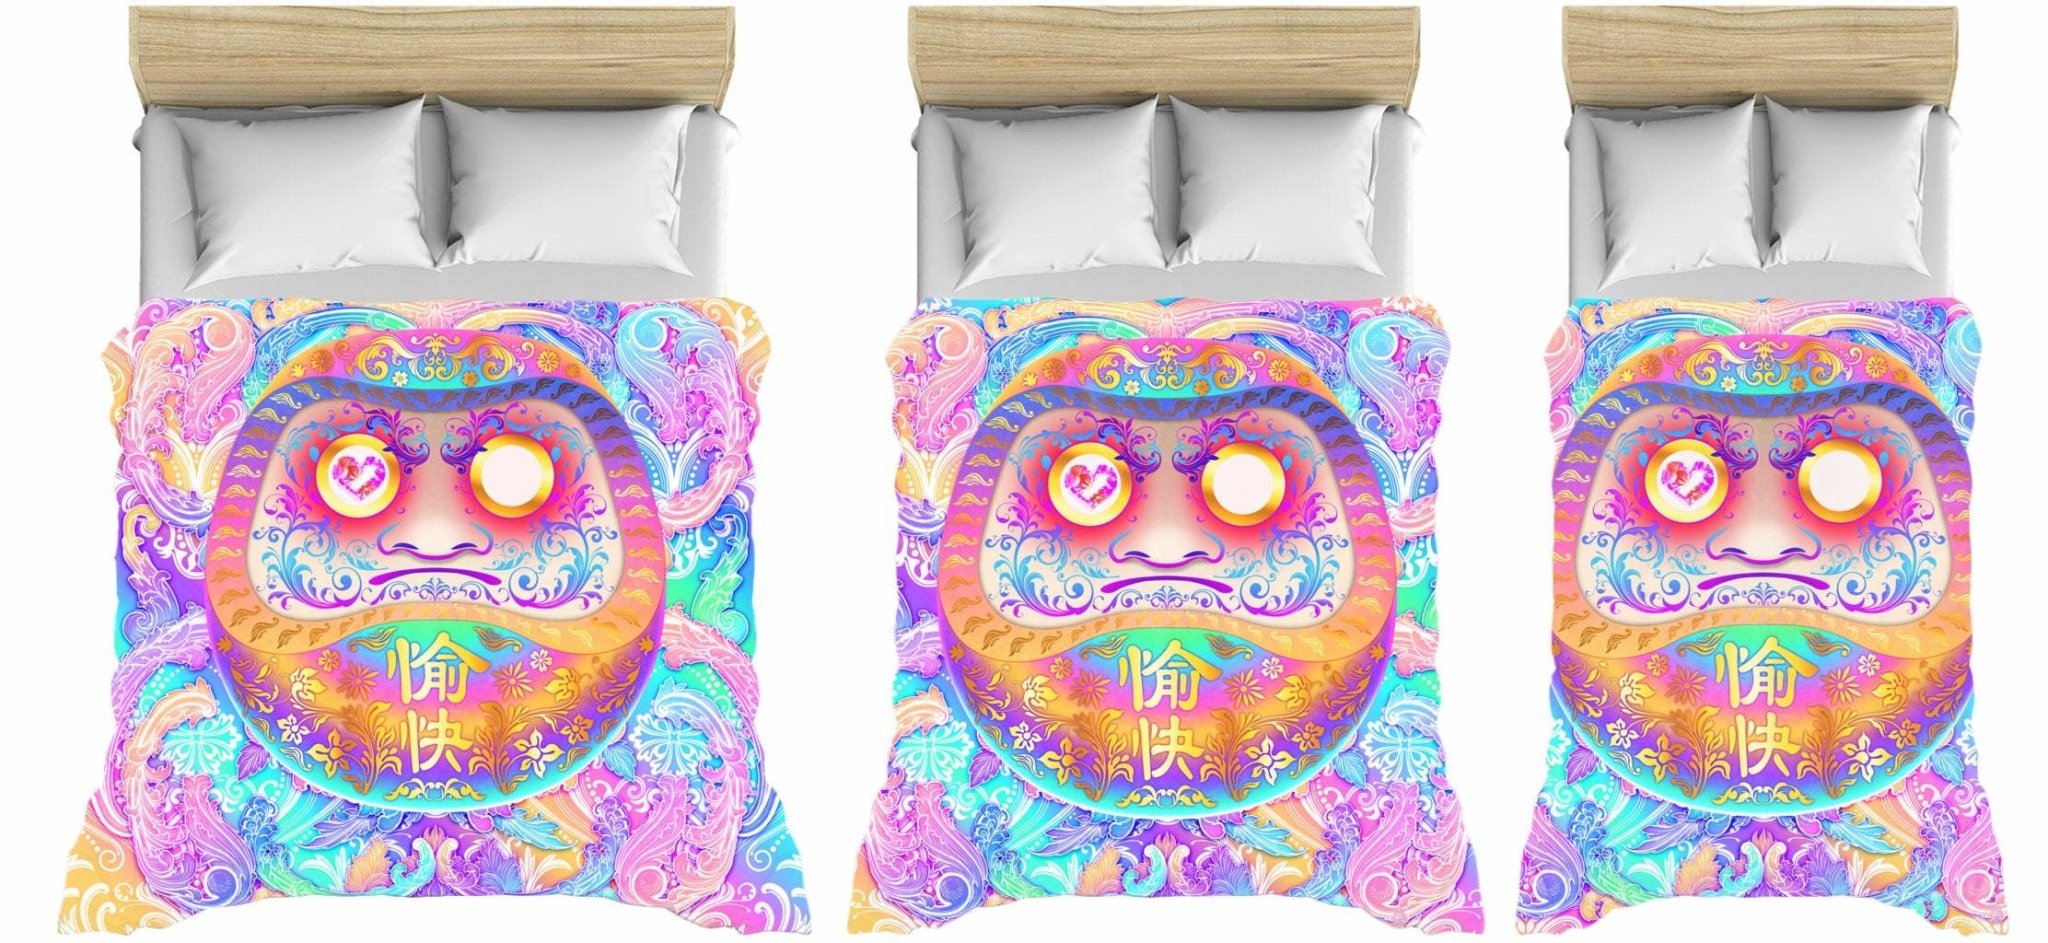 Holographic Bedding Set, Comforter and Duvet, Pastel Daruma, Aesthetic Bed Cover, Kawaii Bedroom Decor, Indie, King, Queen and Twin Size - Psychedelic, Fairy Kei - Abysm Internal